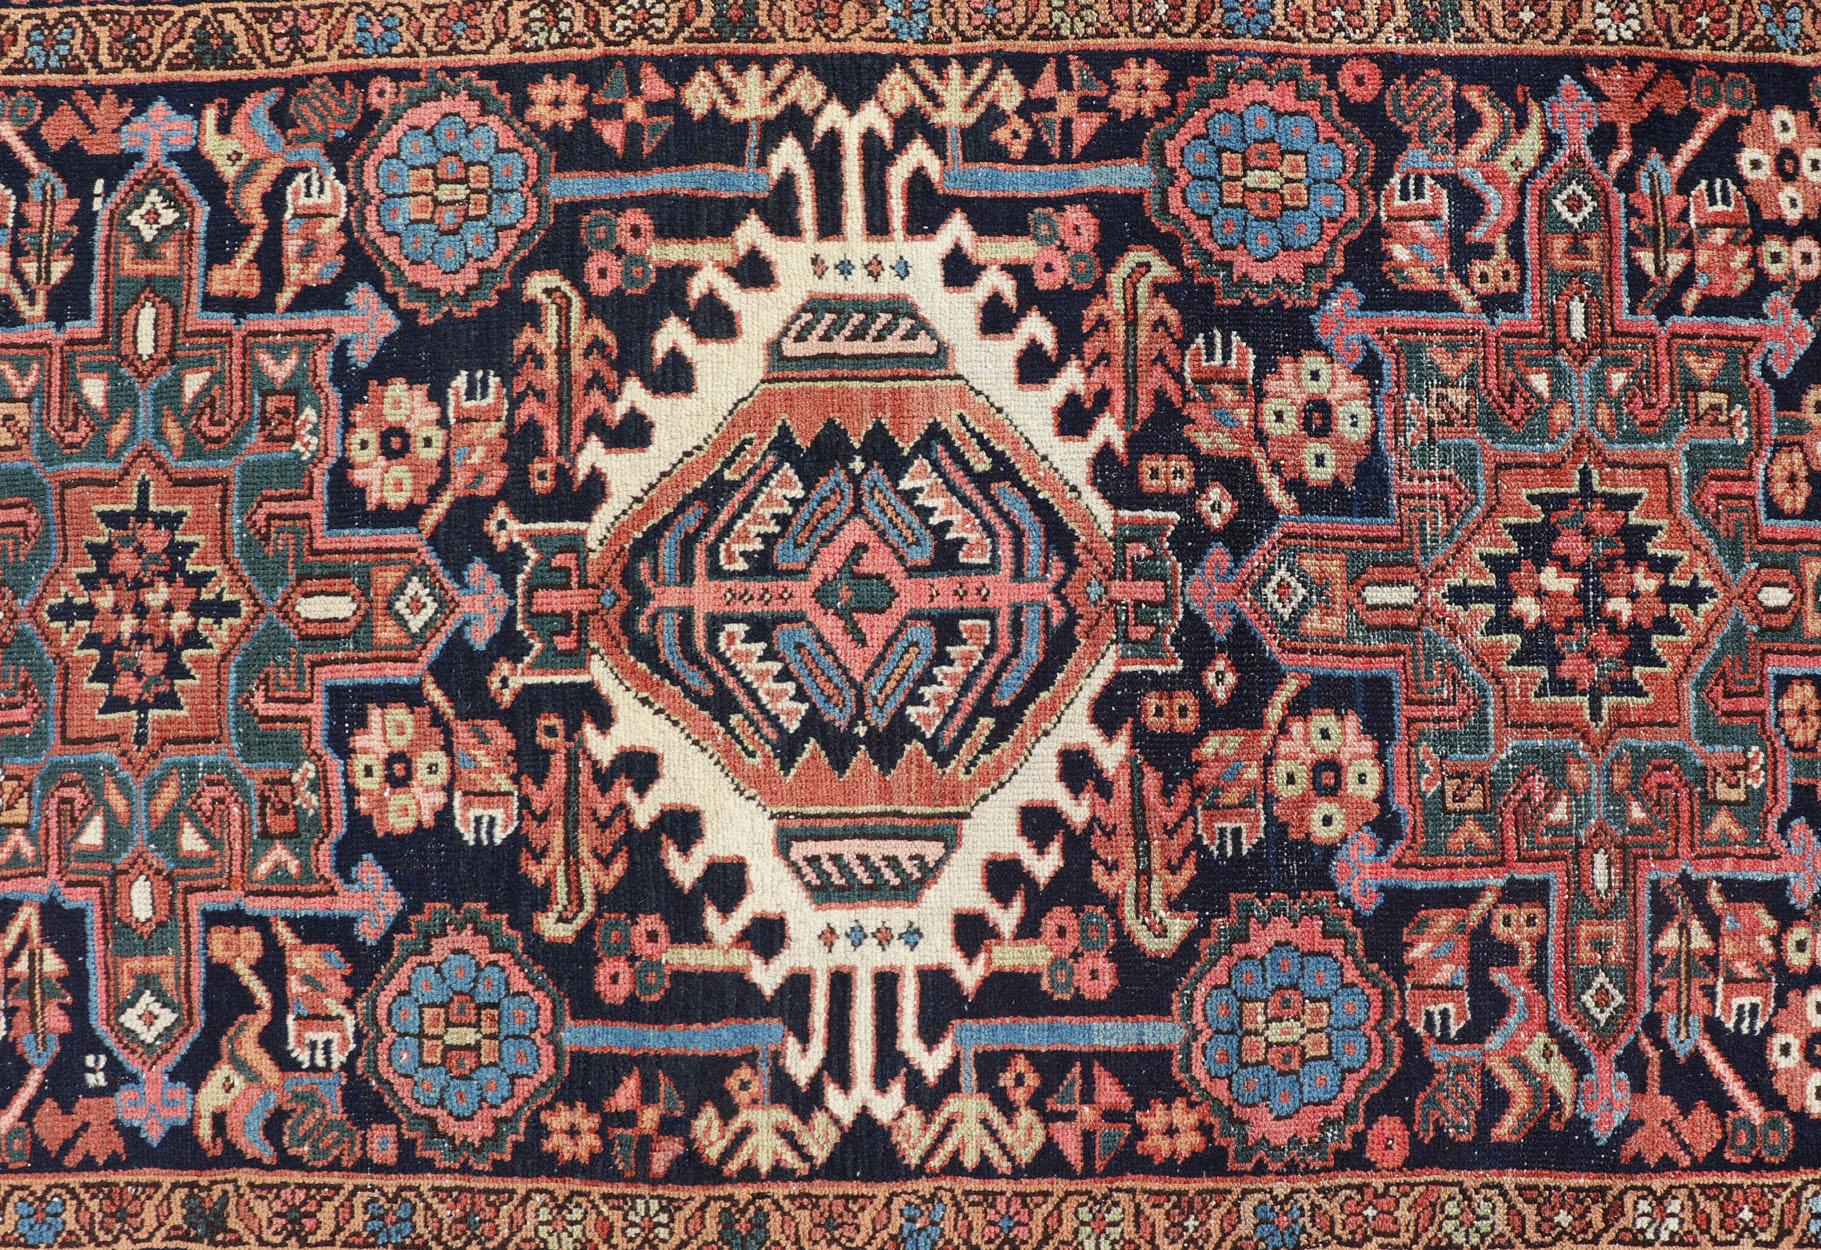 This lovely Antique Heriz rug, hailing from northwestern Iran (circa 1920s), features a central medallion design surrounded by exquisitely defined geometric motifs. The rug has been rendered in Ivory, gorgeous hues of blue, orange and jewel tones.